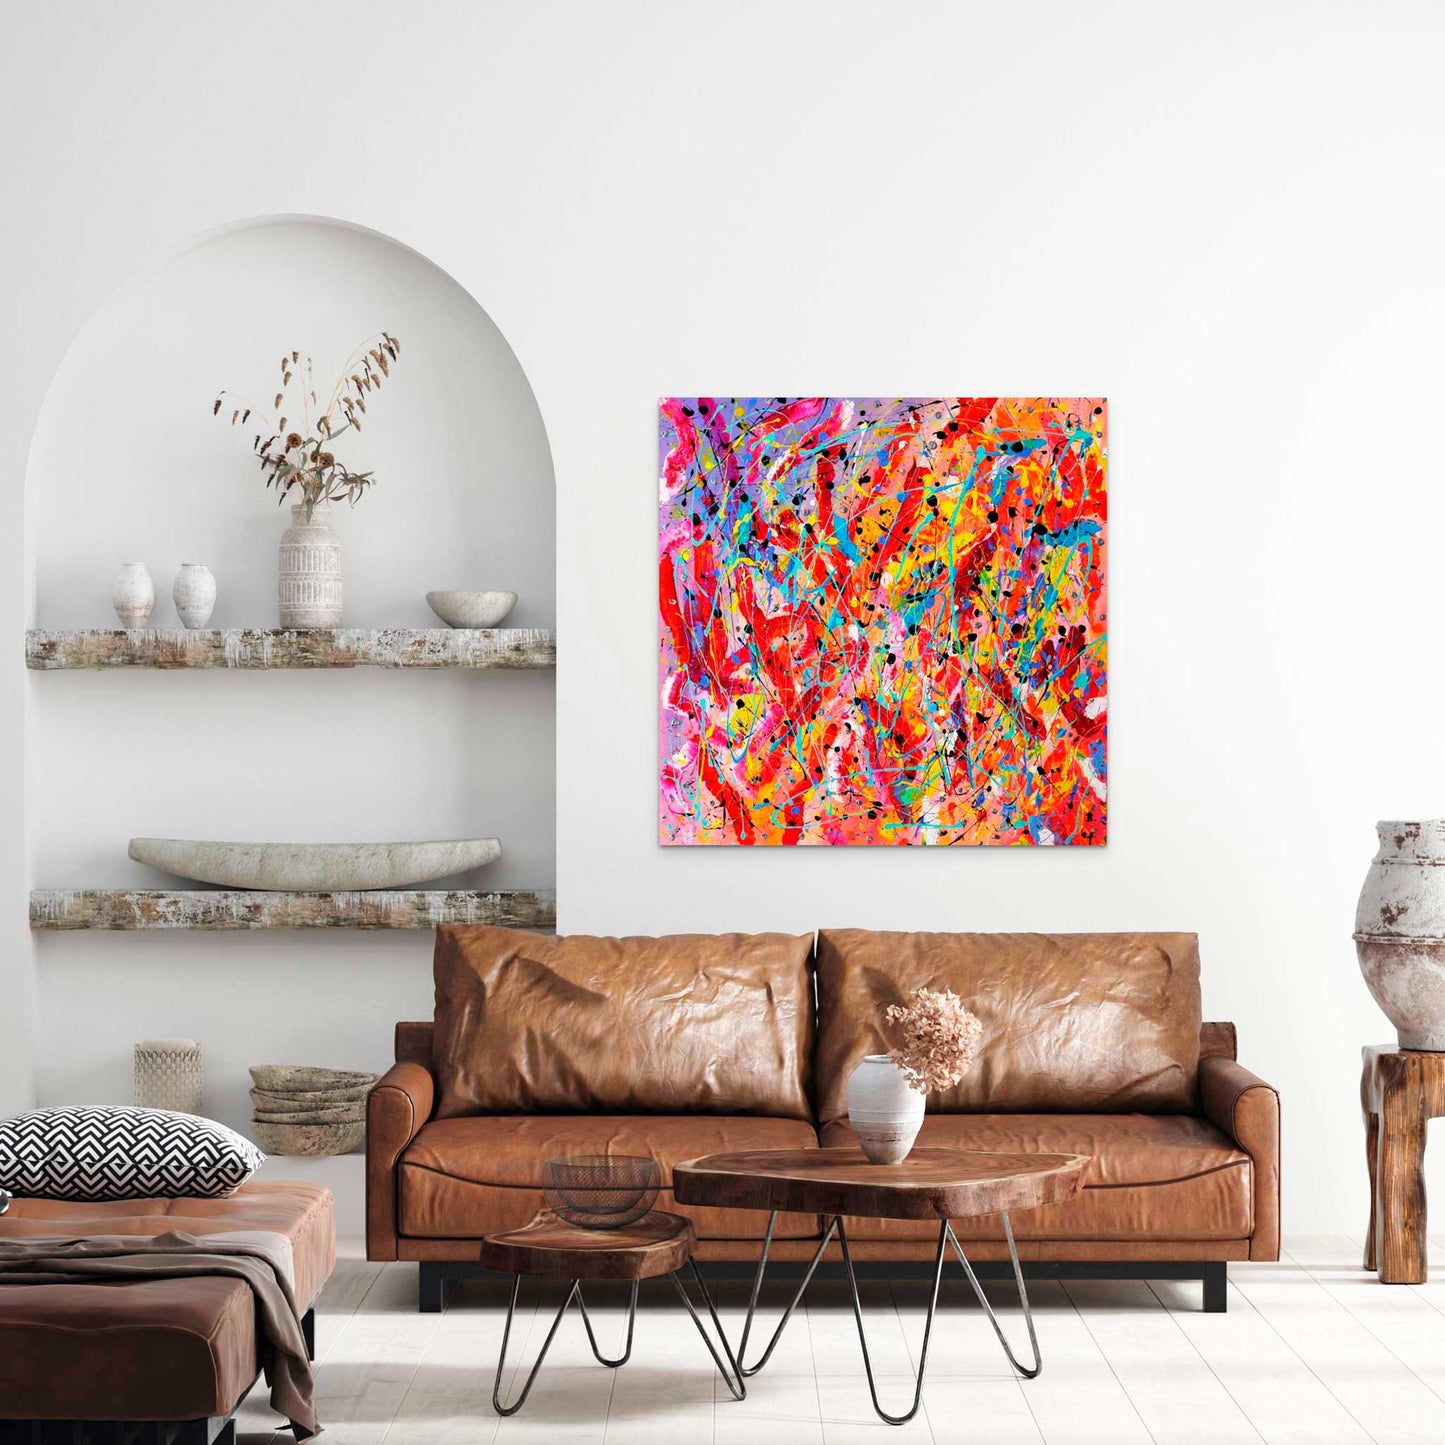 Alive, original abstract art on canvas seen hanging in situ in living room above tan leather sofa. Artwork is one of a kind on canvas by Bridget Bradley Abstract Artist